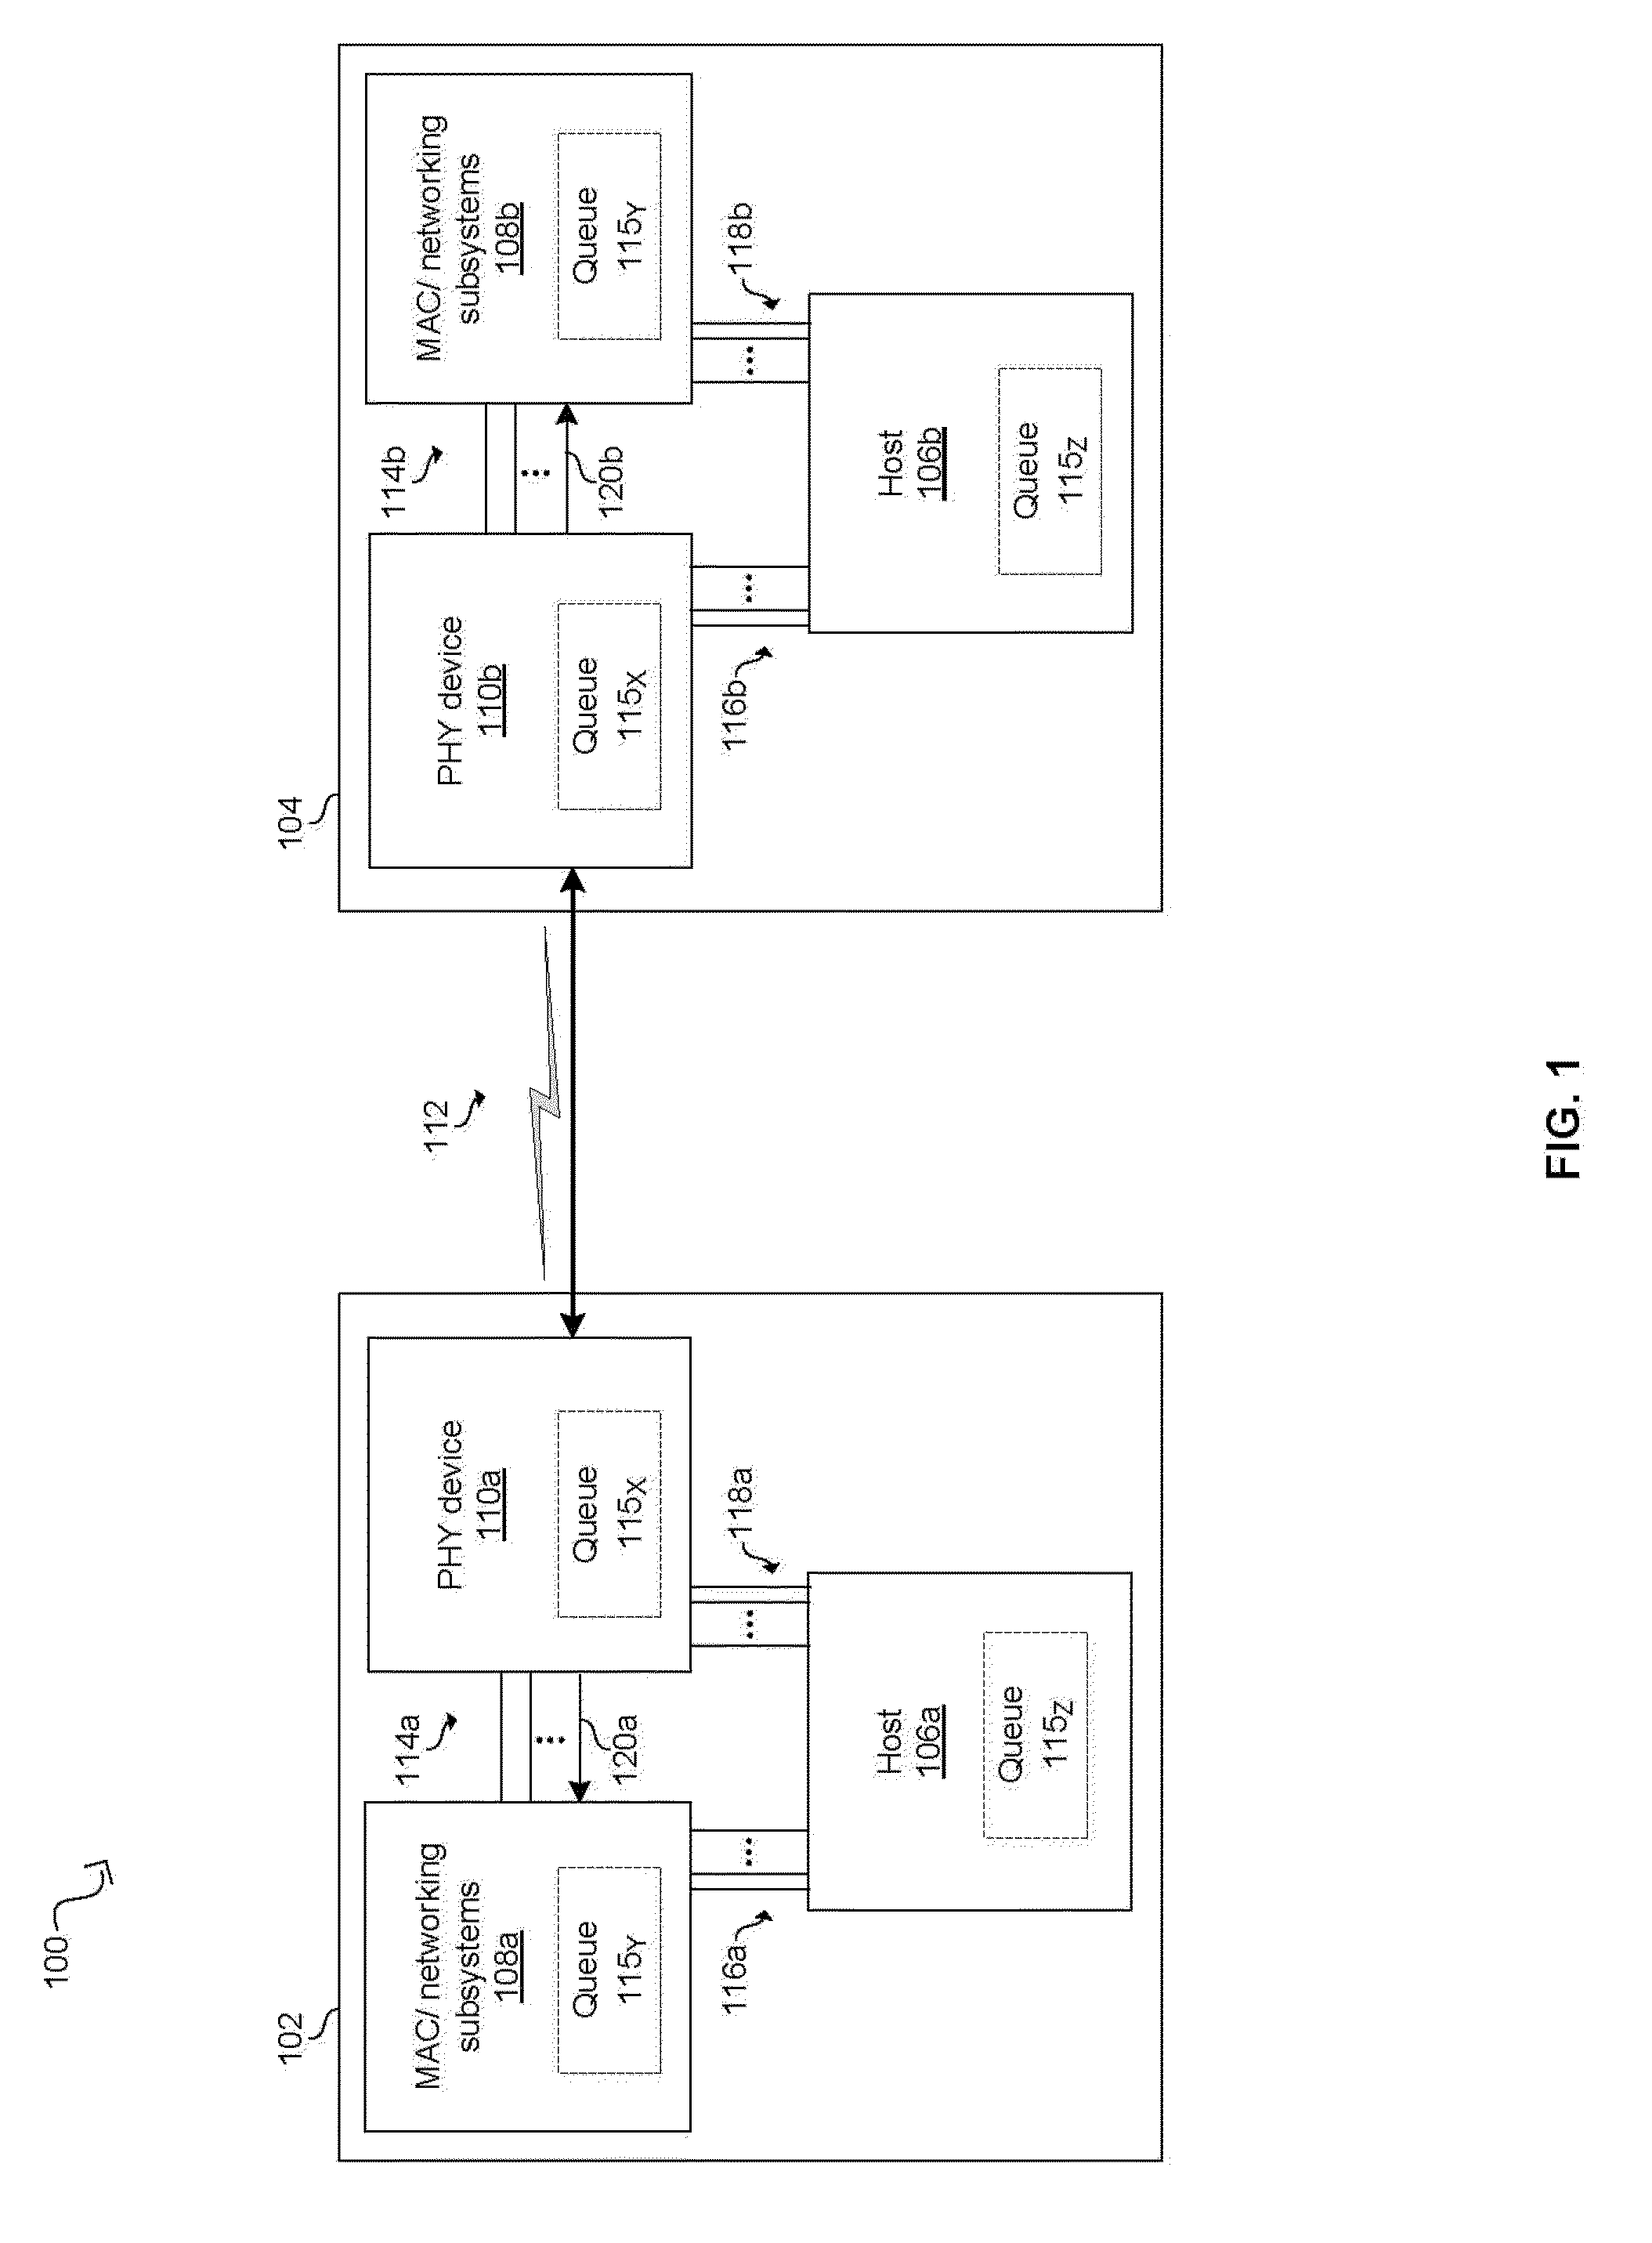 Method and System for Network Communications Via a Configurable Multi-Use Ethernet PHY